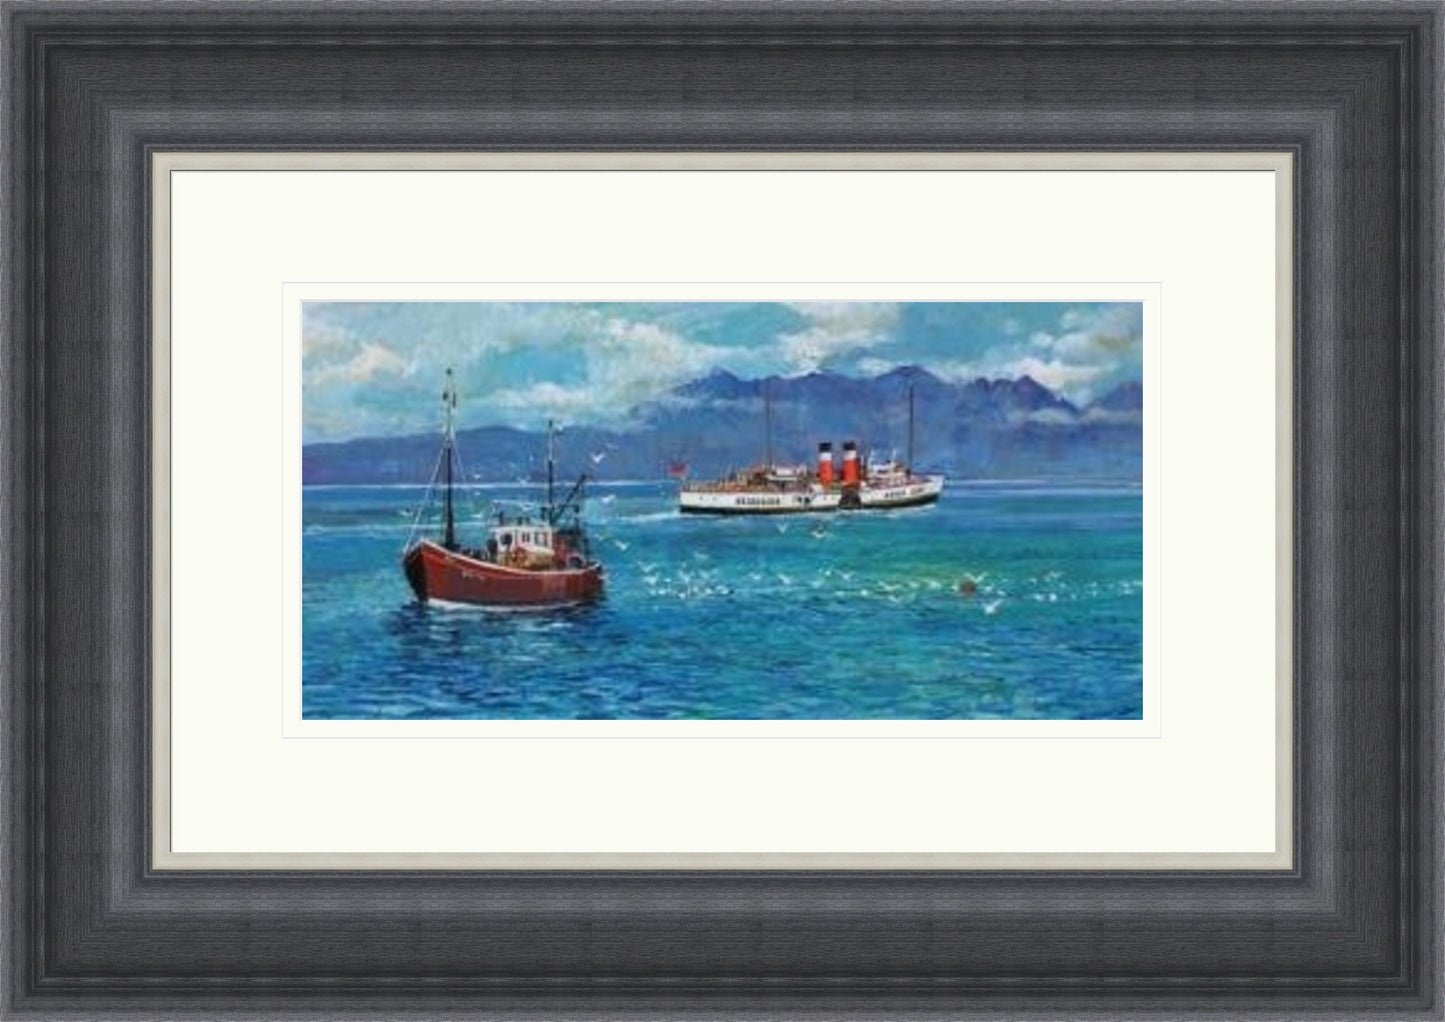 The Waverley and Fishing Boat by Bob Lees